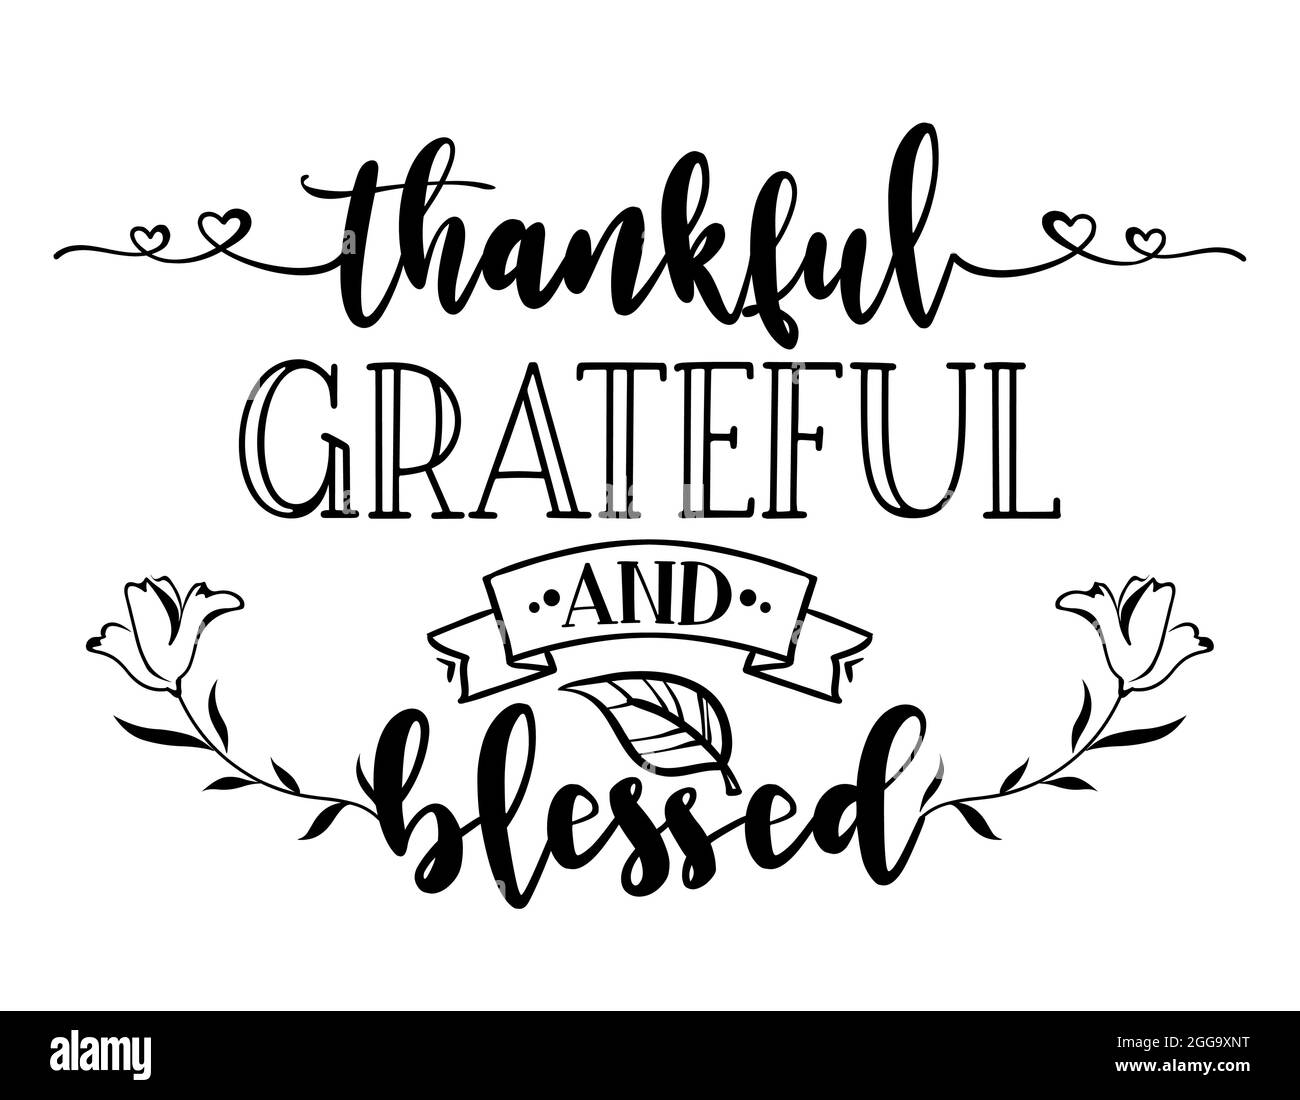 Thankful Grateful Blessed - Inspirational Thanksgiving day beautiful handwritten quote, lettering message. Hand drawn autumn, fall phrase. Handwritten Stock Vector